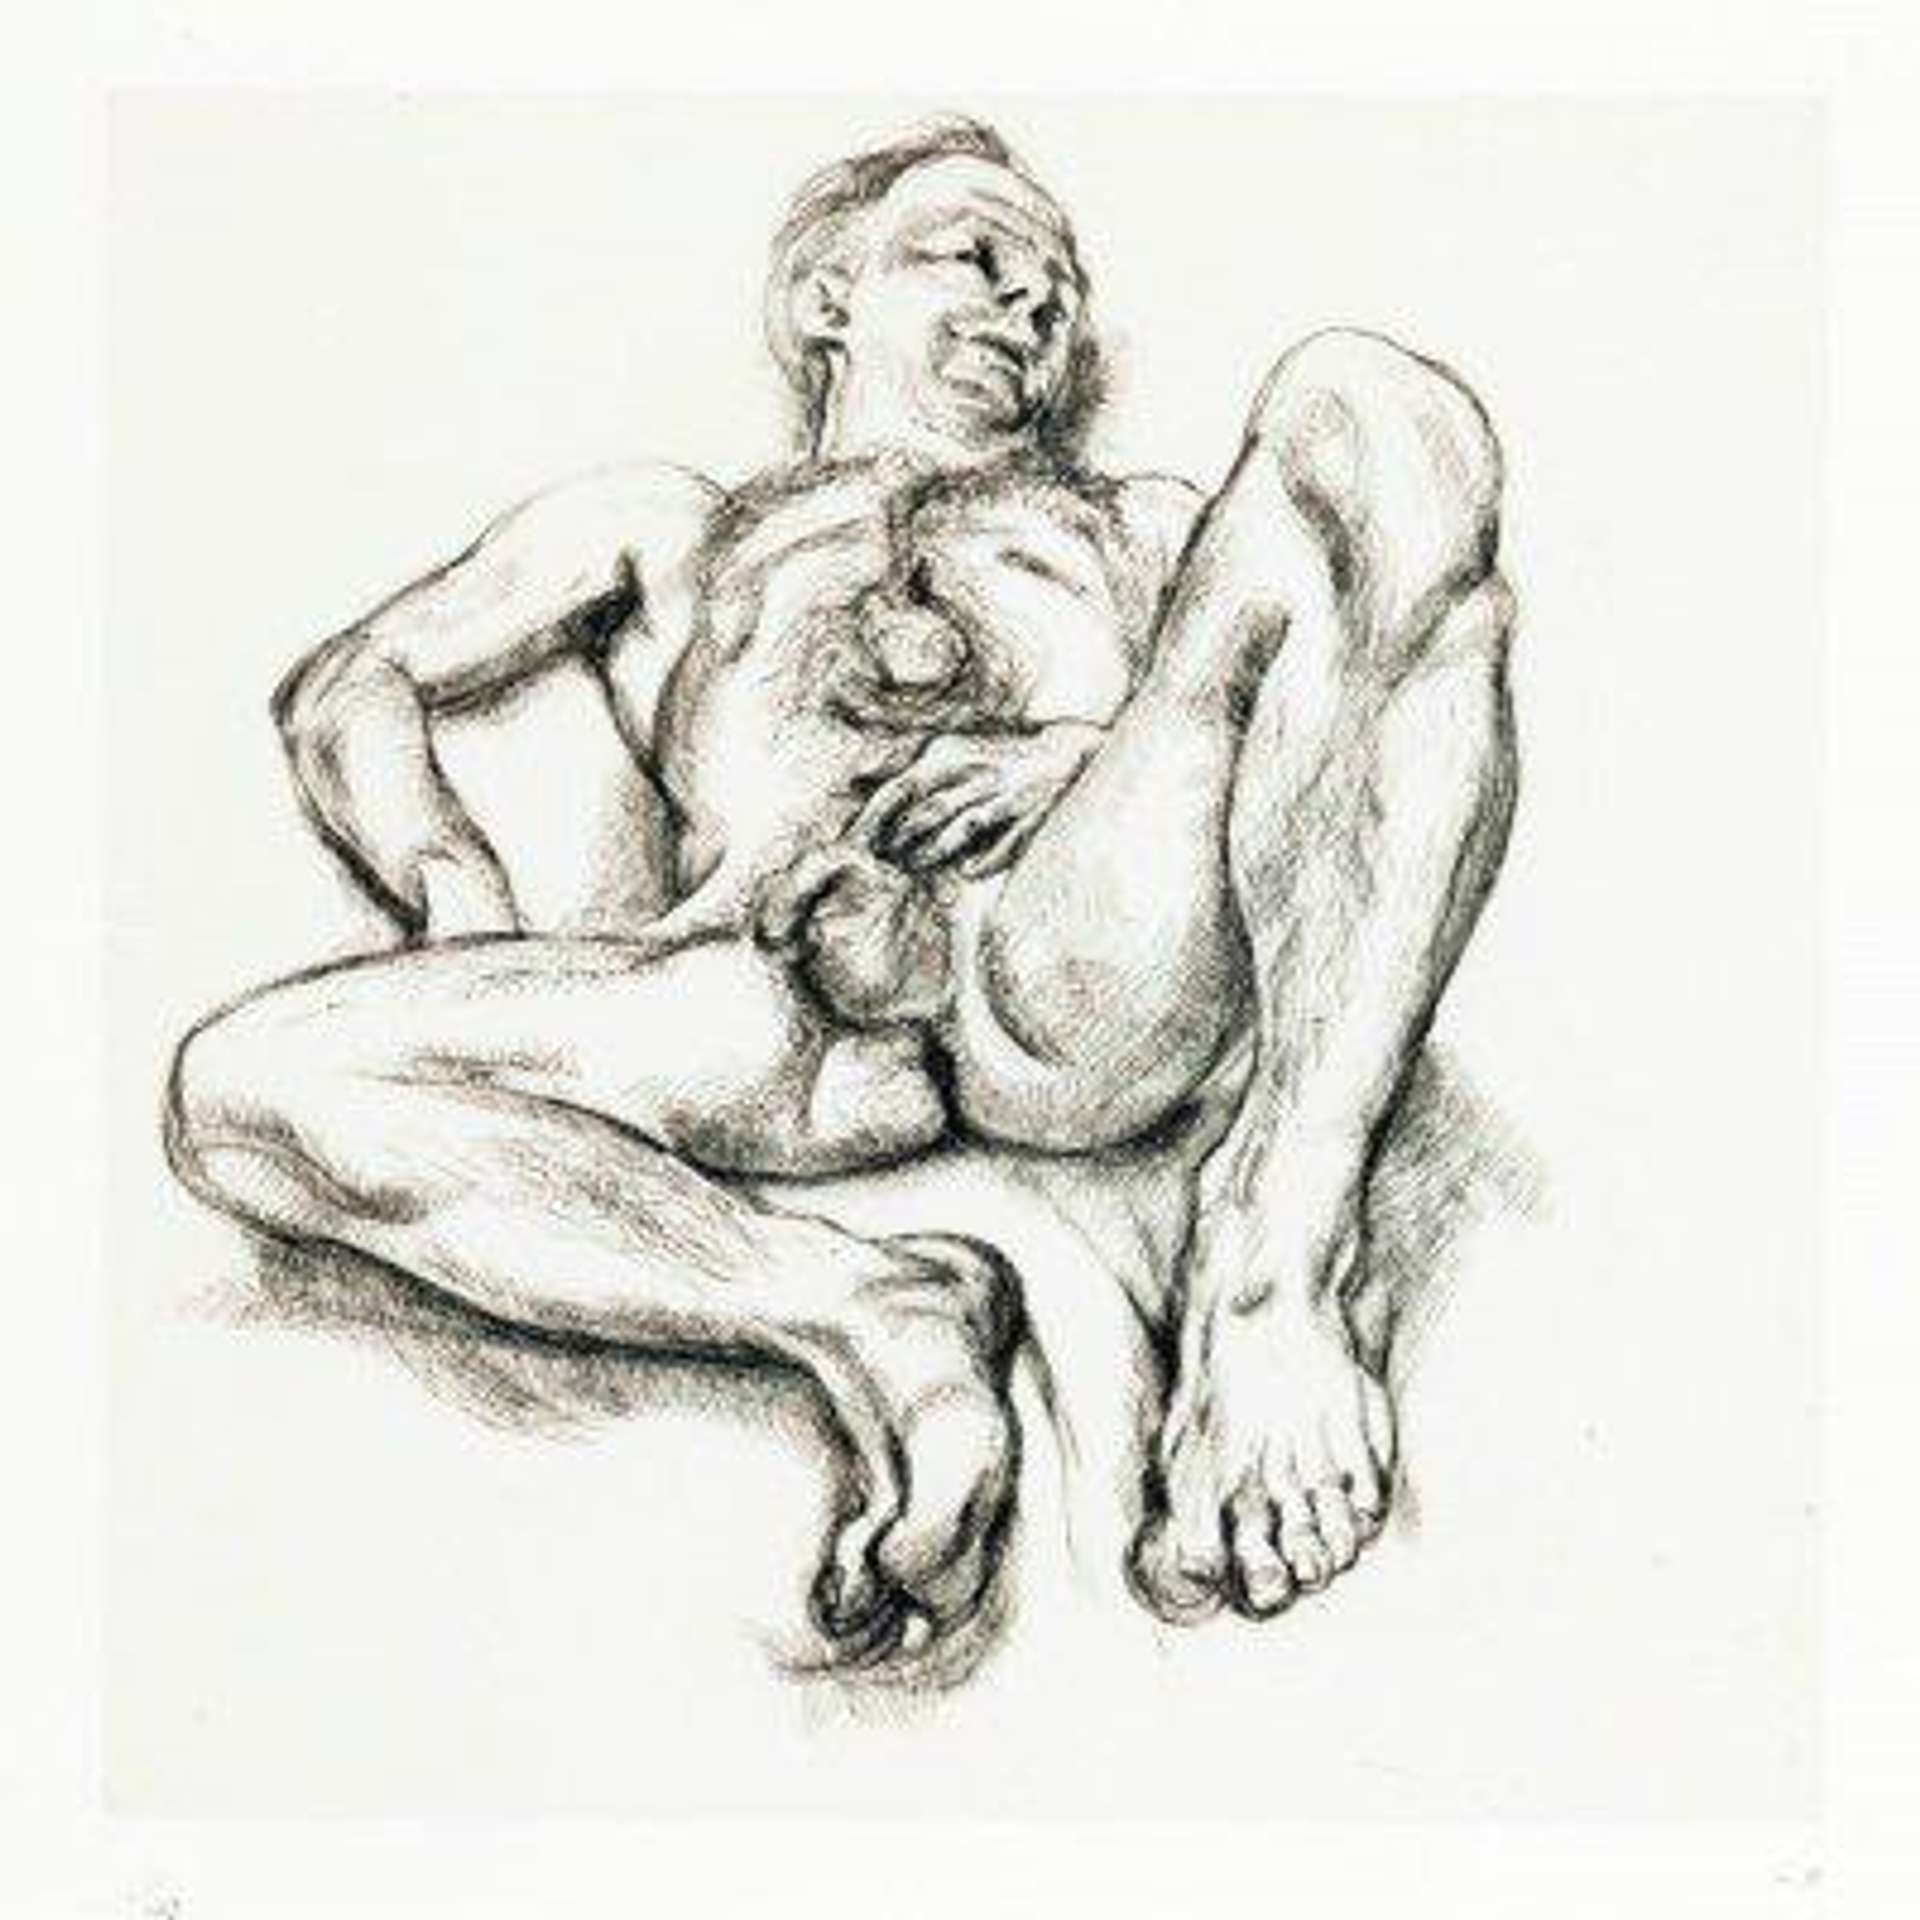 Lucian Freud: Naked Man On Bed - Signed Print